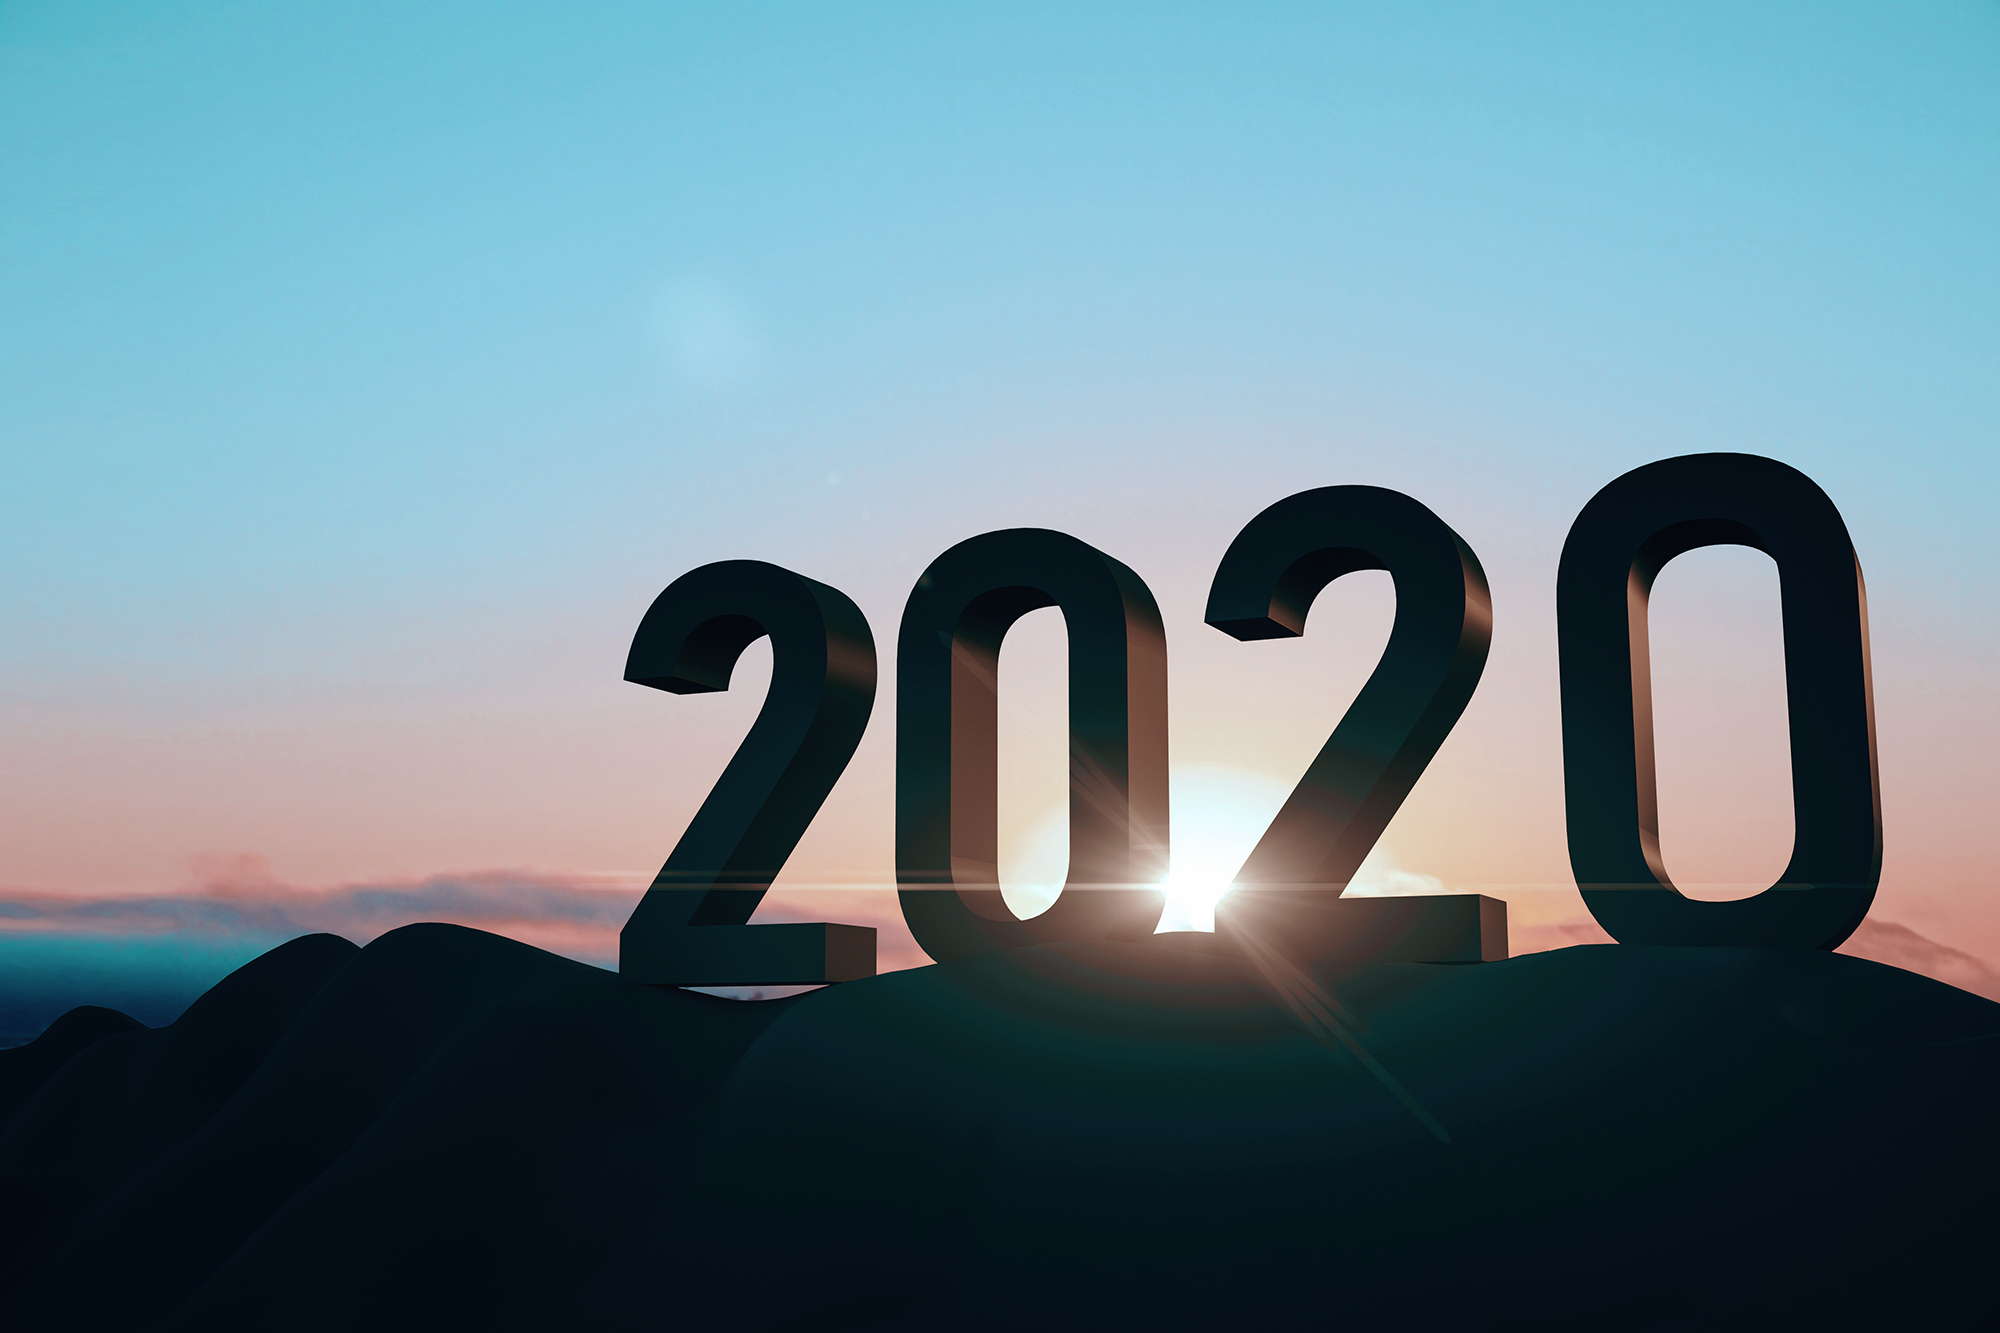 CLS Investments believes investors should keep their eye on three big things in the asset management world heading into 2020.